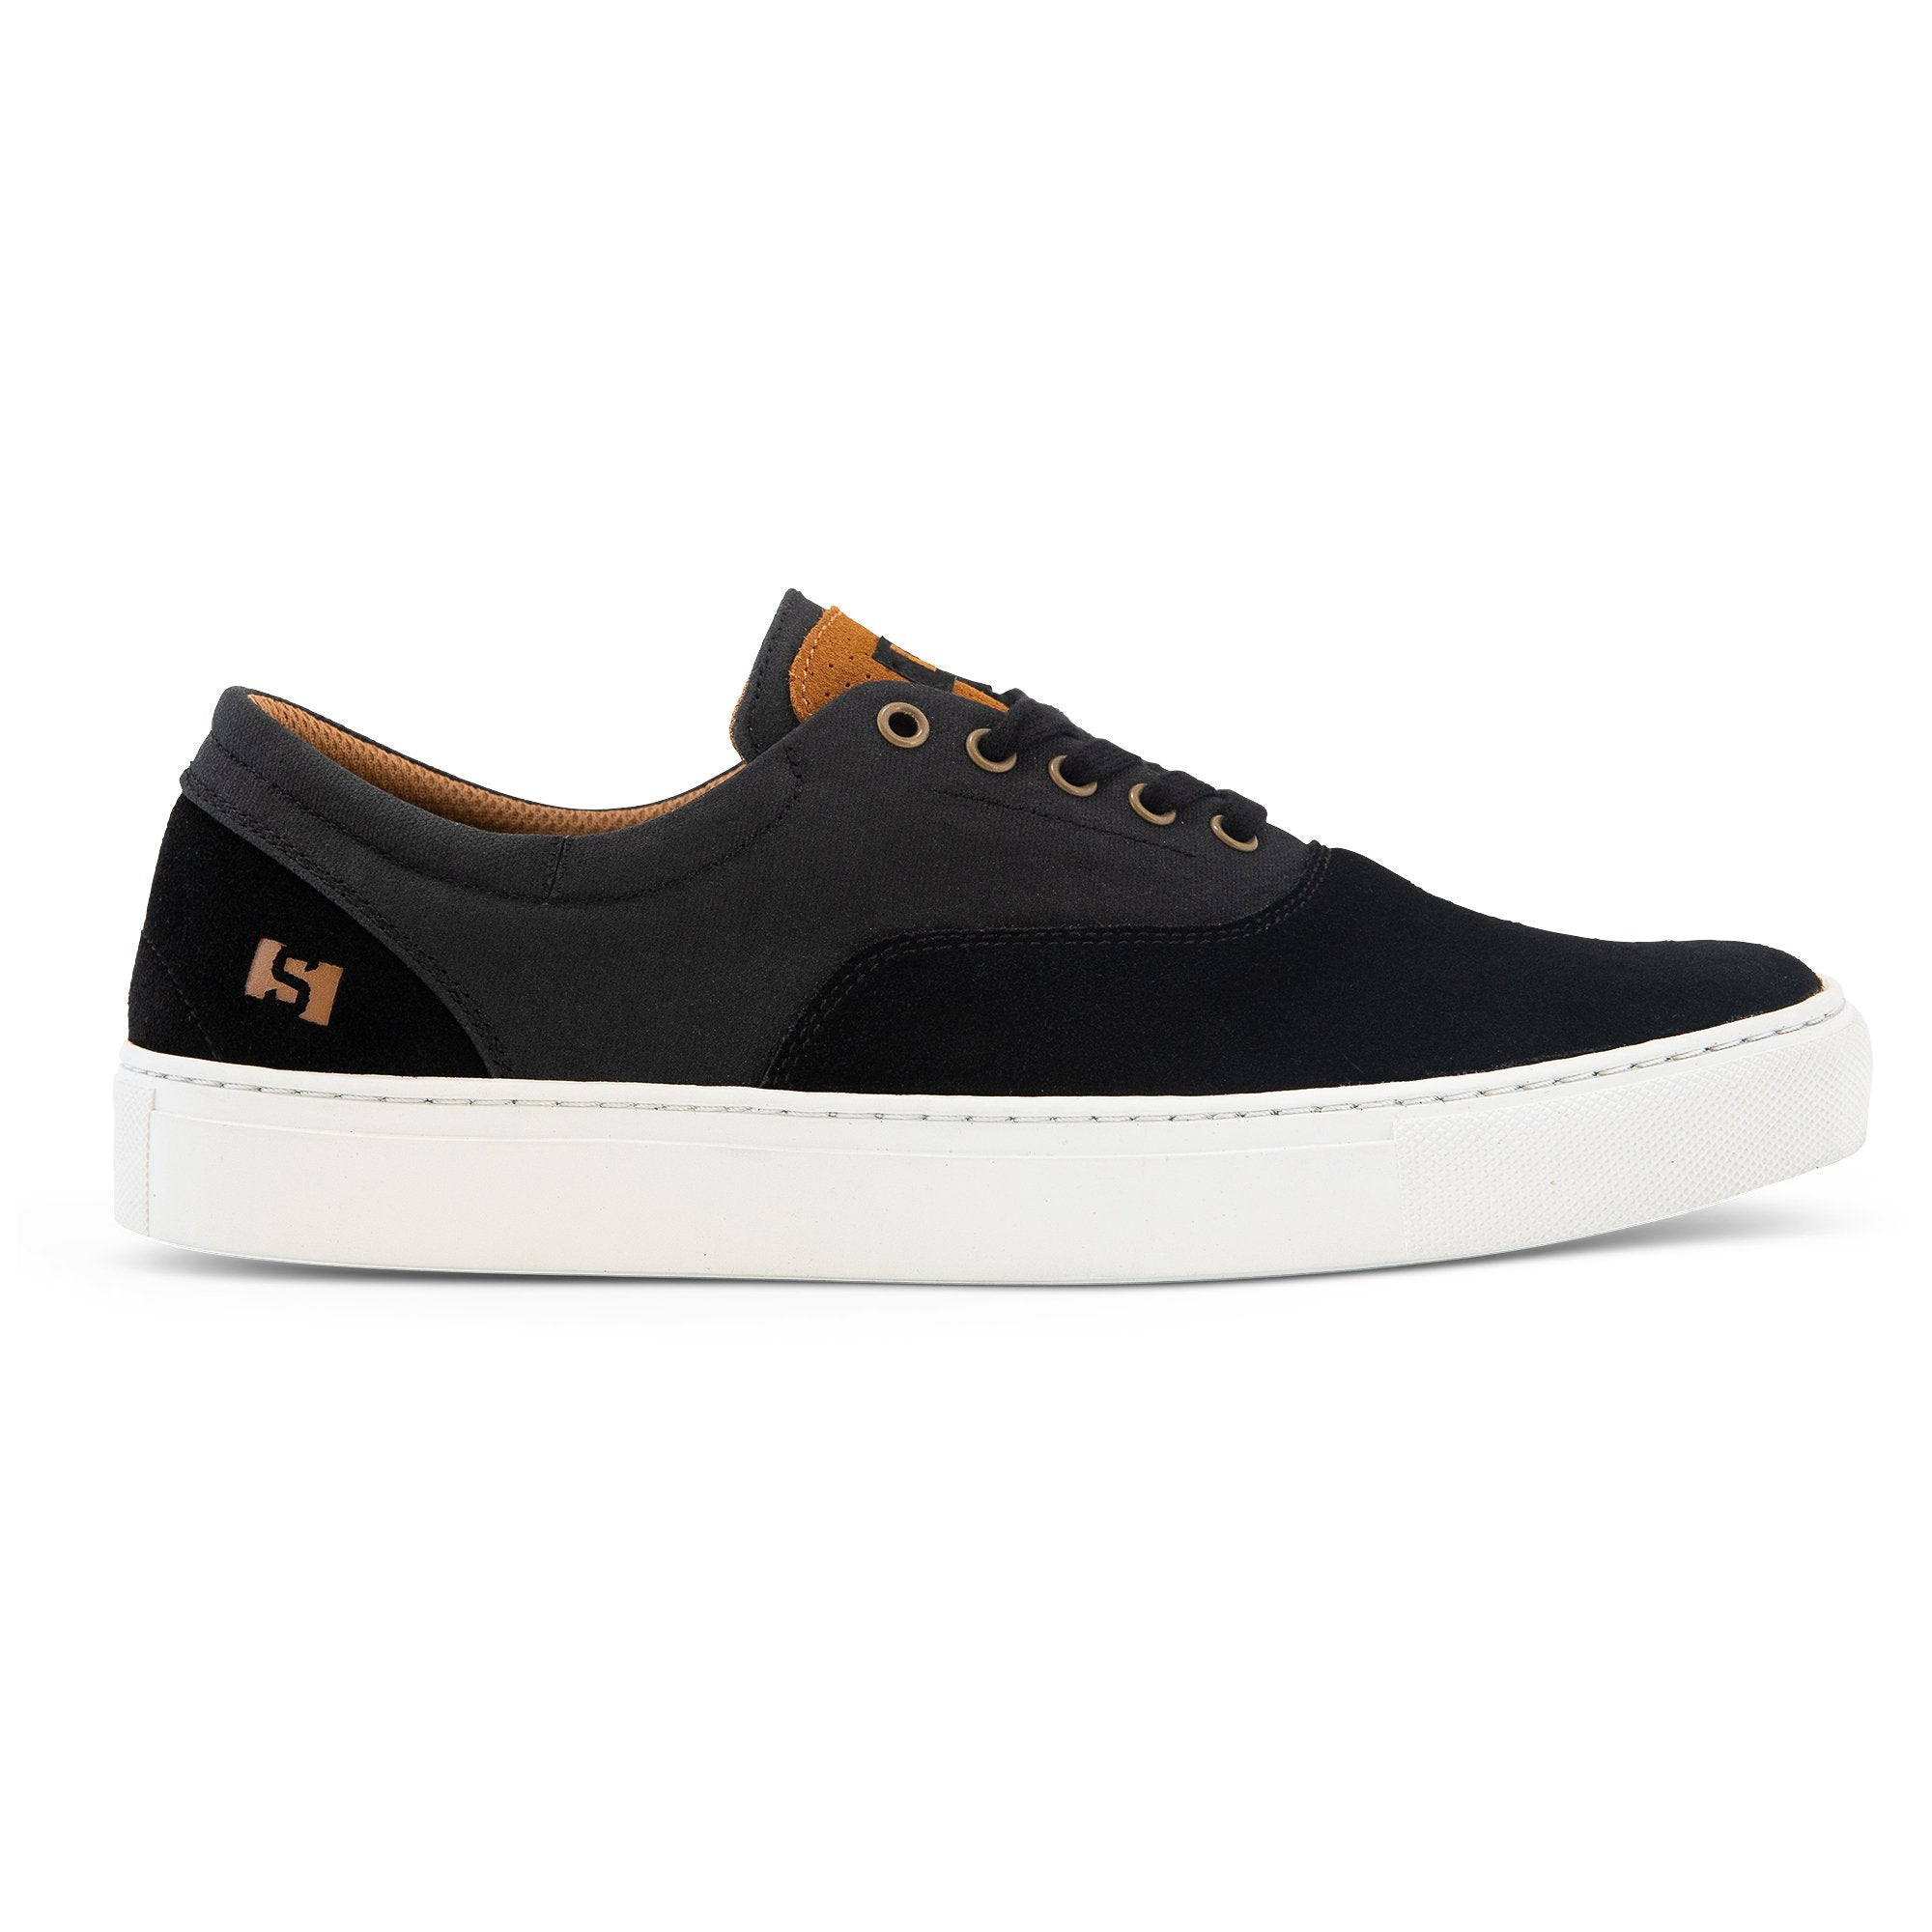 STATE FOOTWEAR PACIFICA CUP SOLE BLACK/WHITE